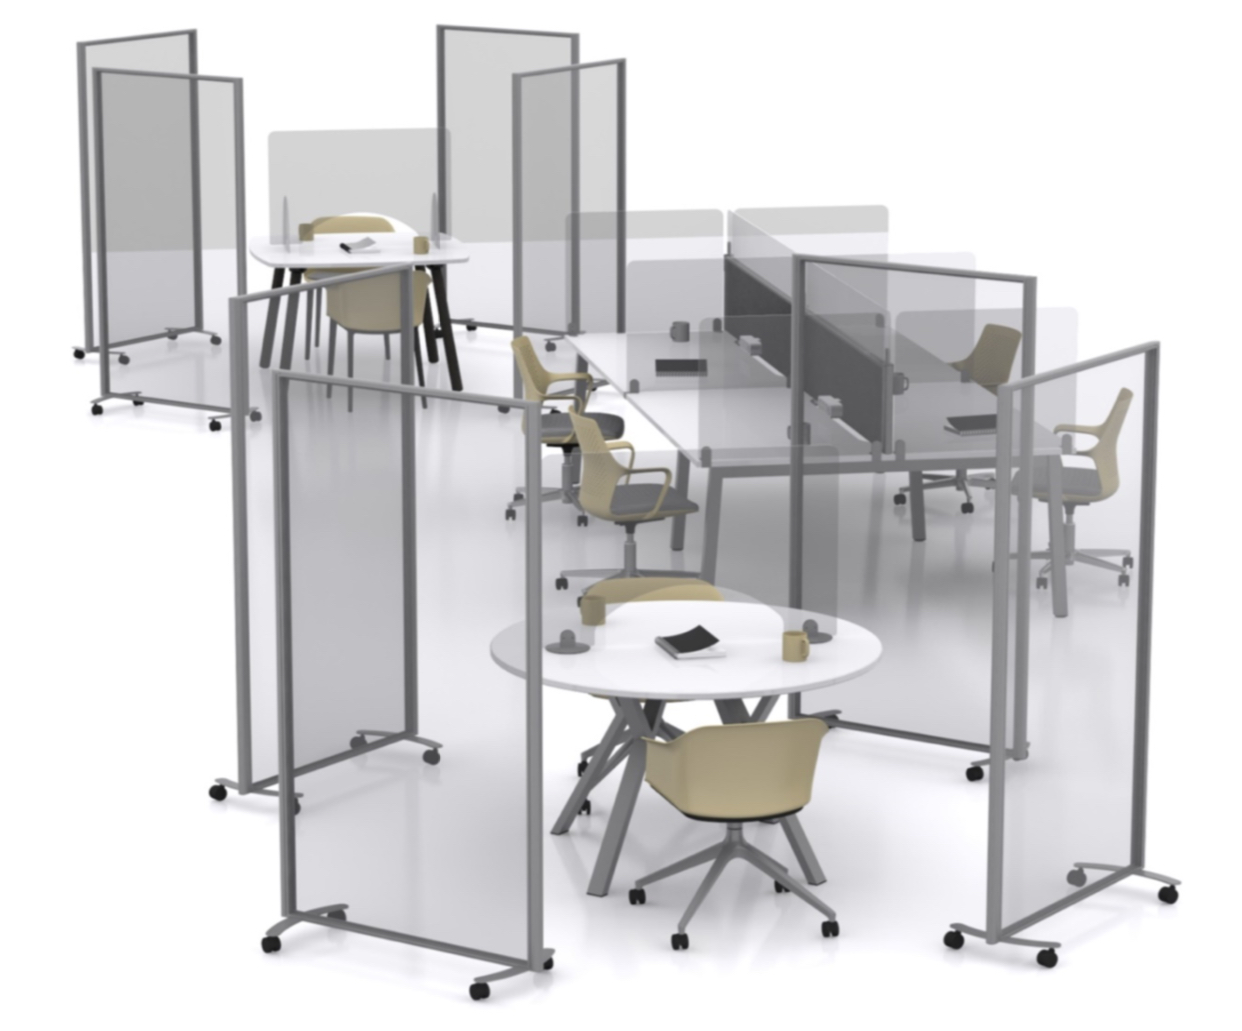 Mobile Floor Standing Protective Screens in Acrylic or Glass with Aluminium Frame  - various sizes